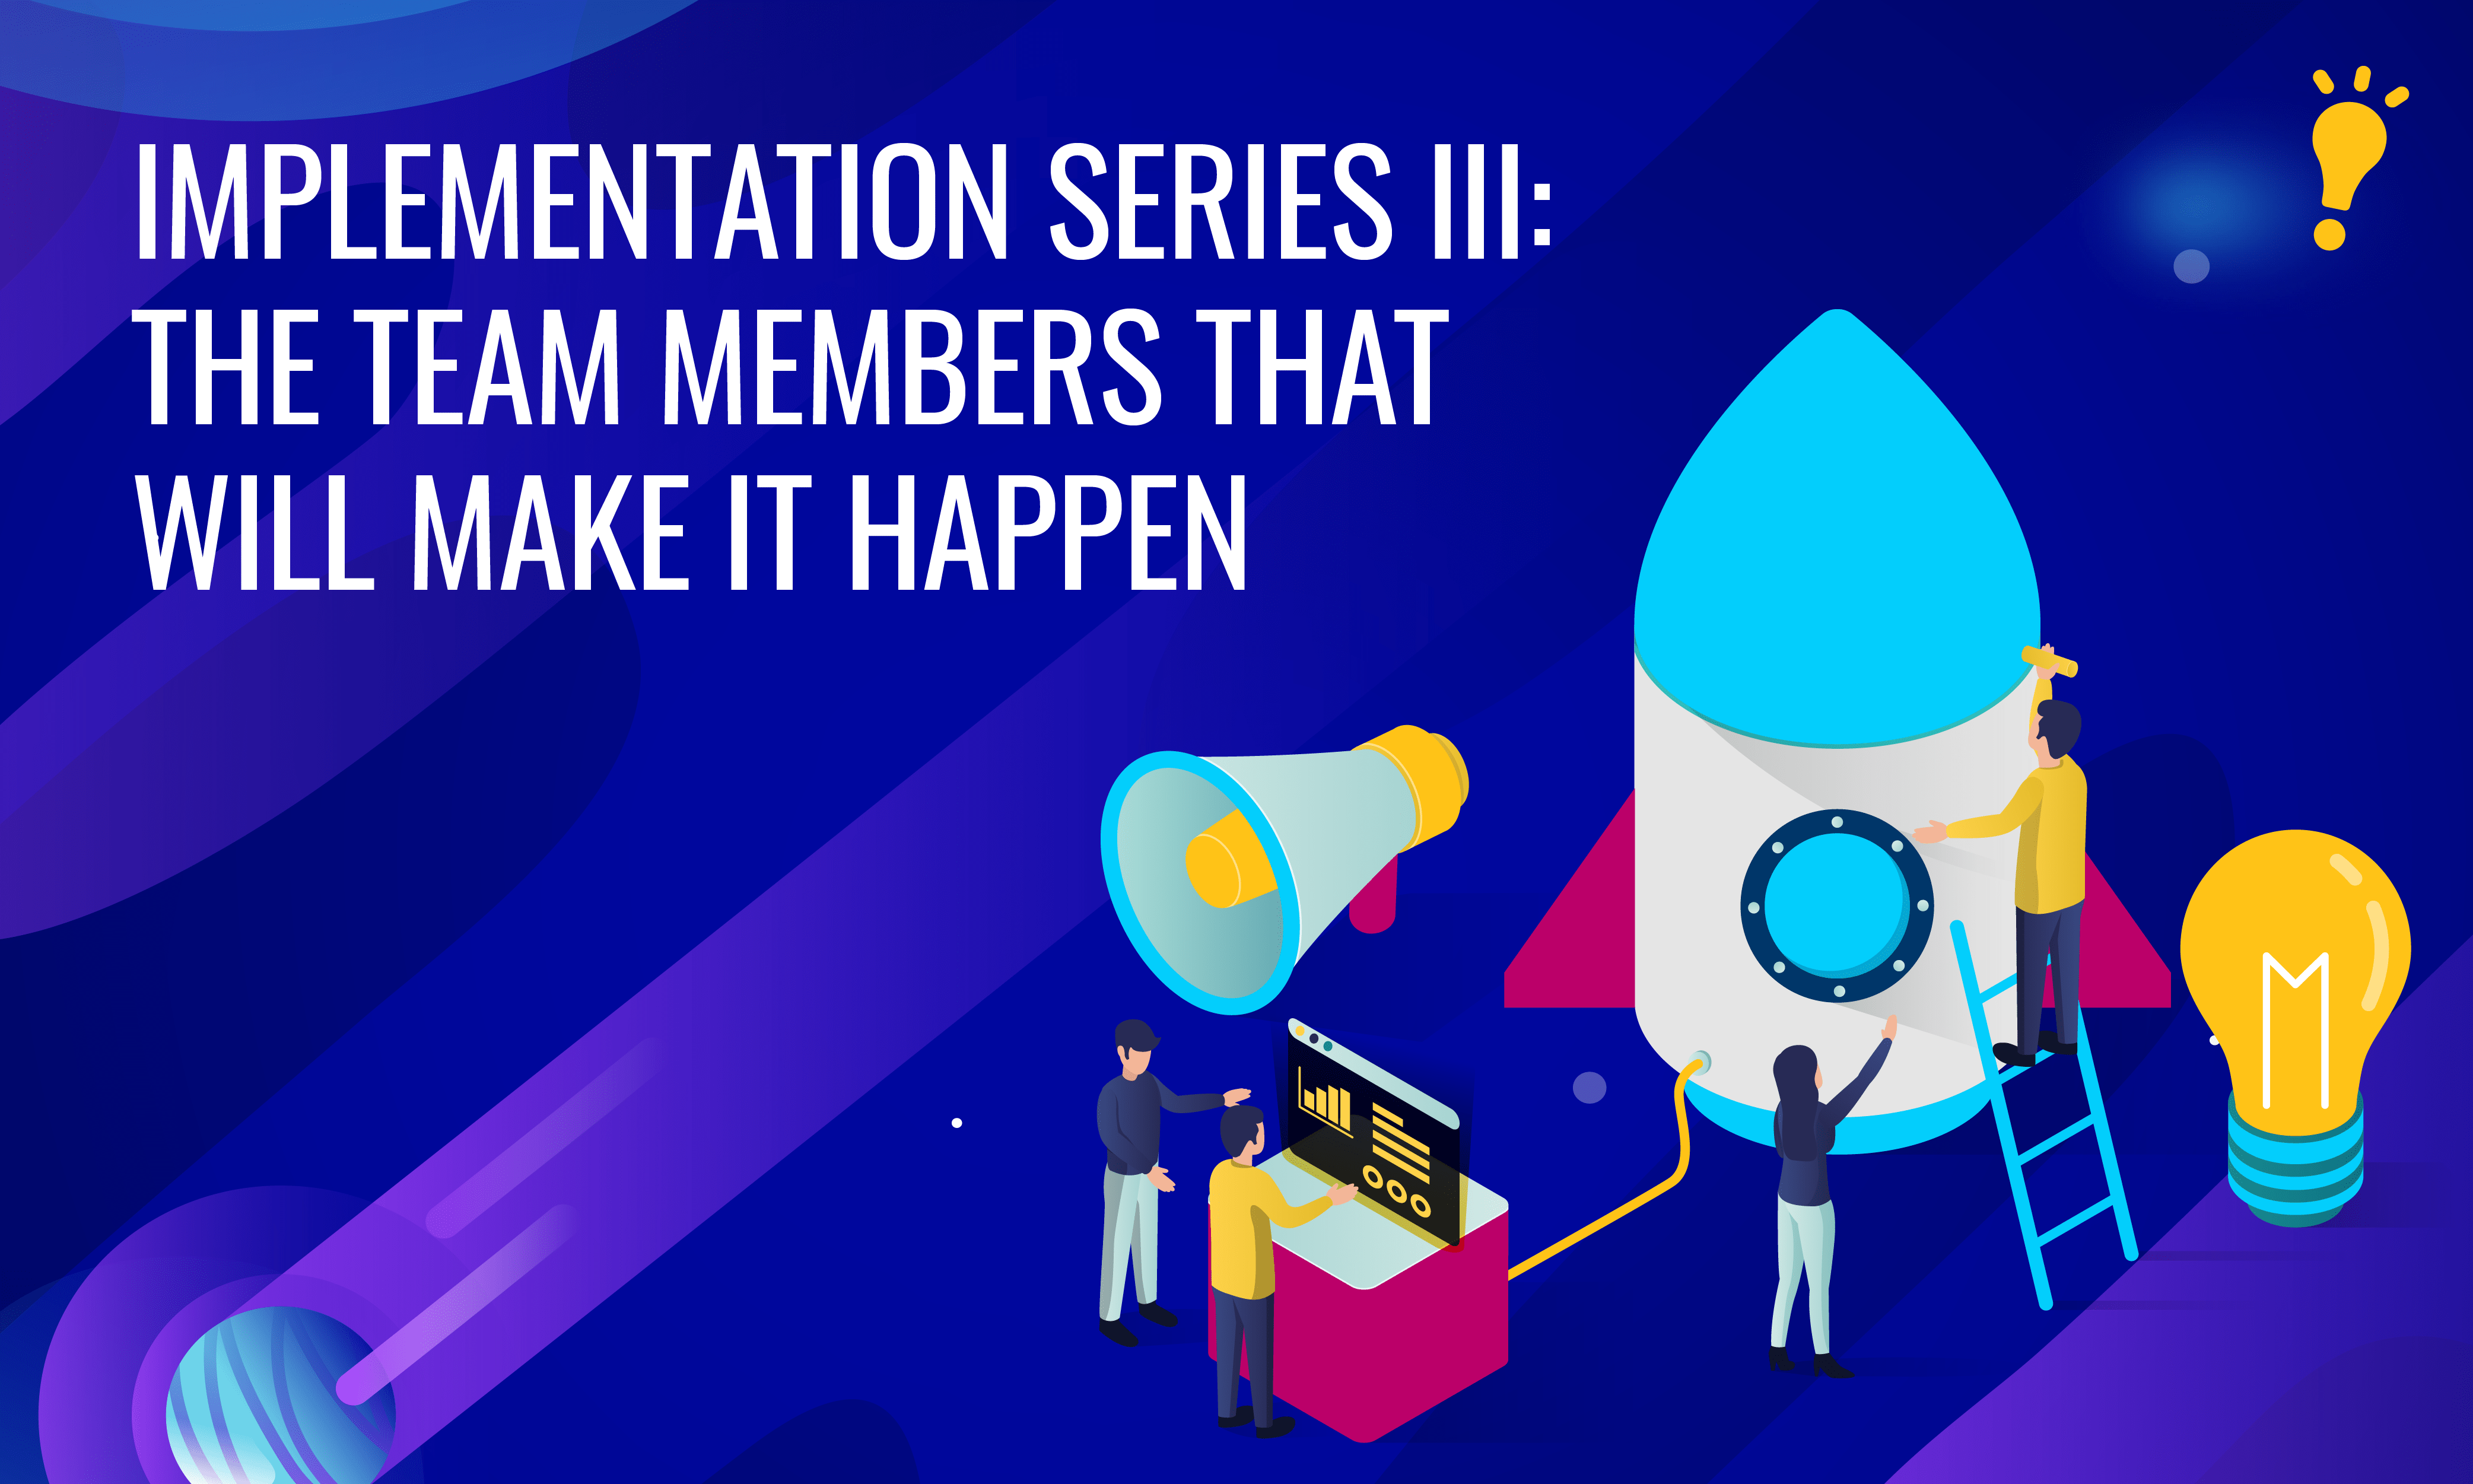 Implementation Series III: The Team Members that Will Make it Happen